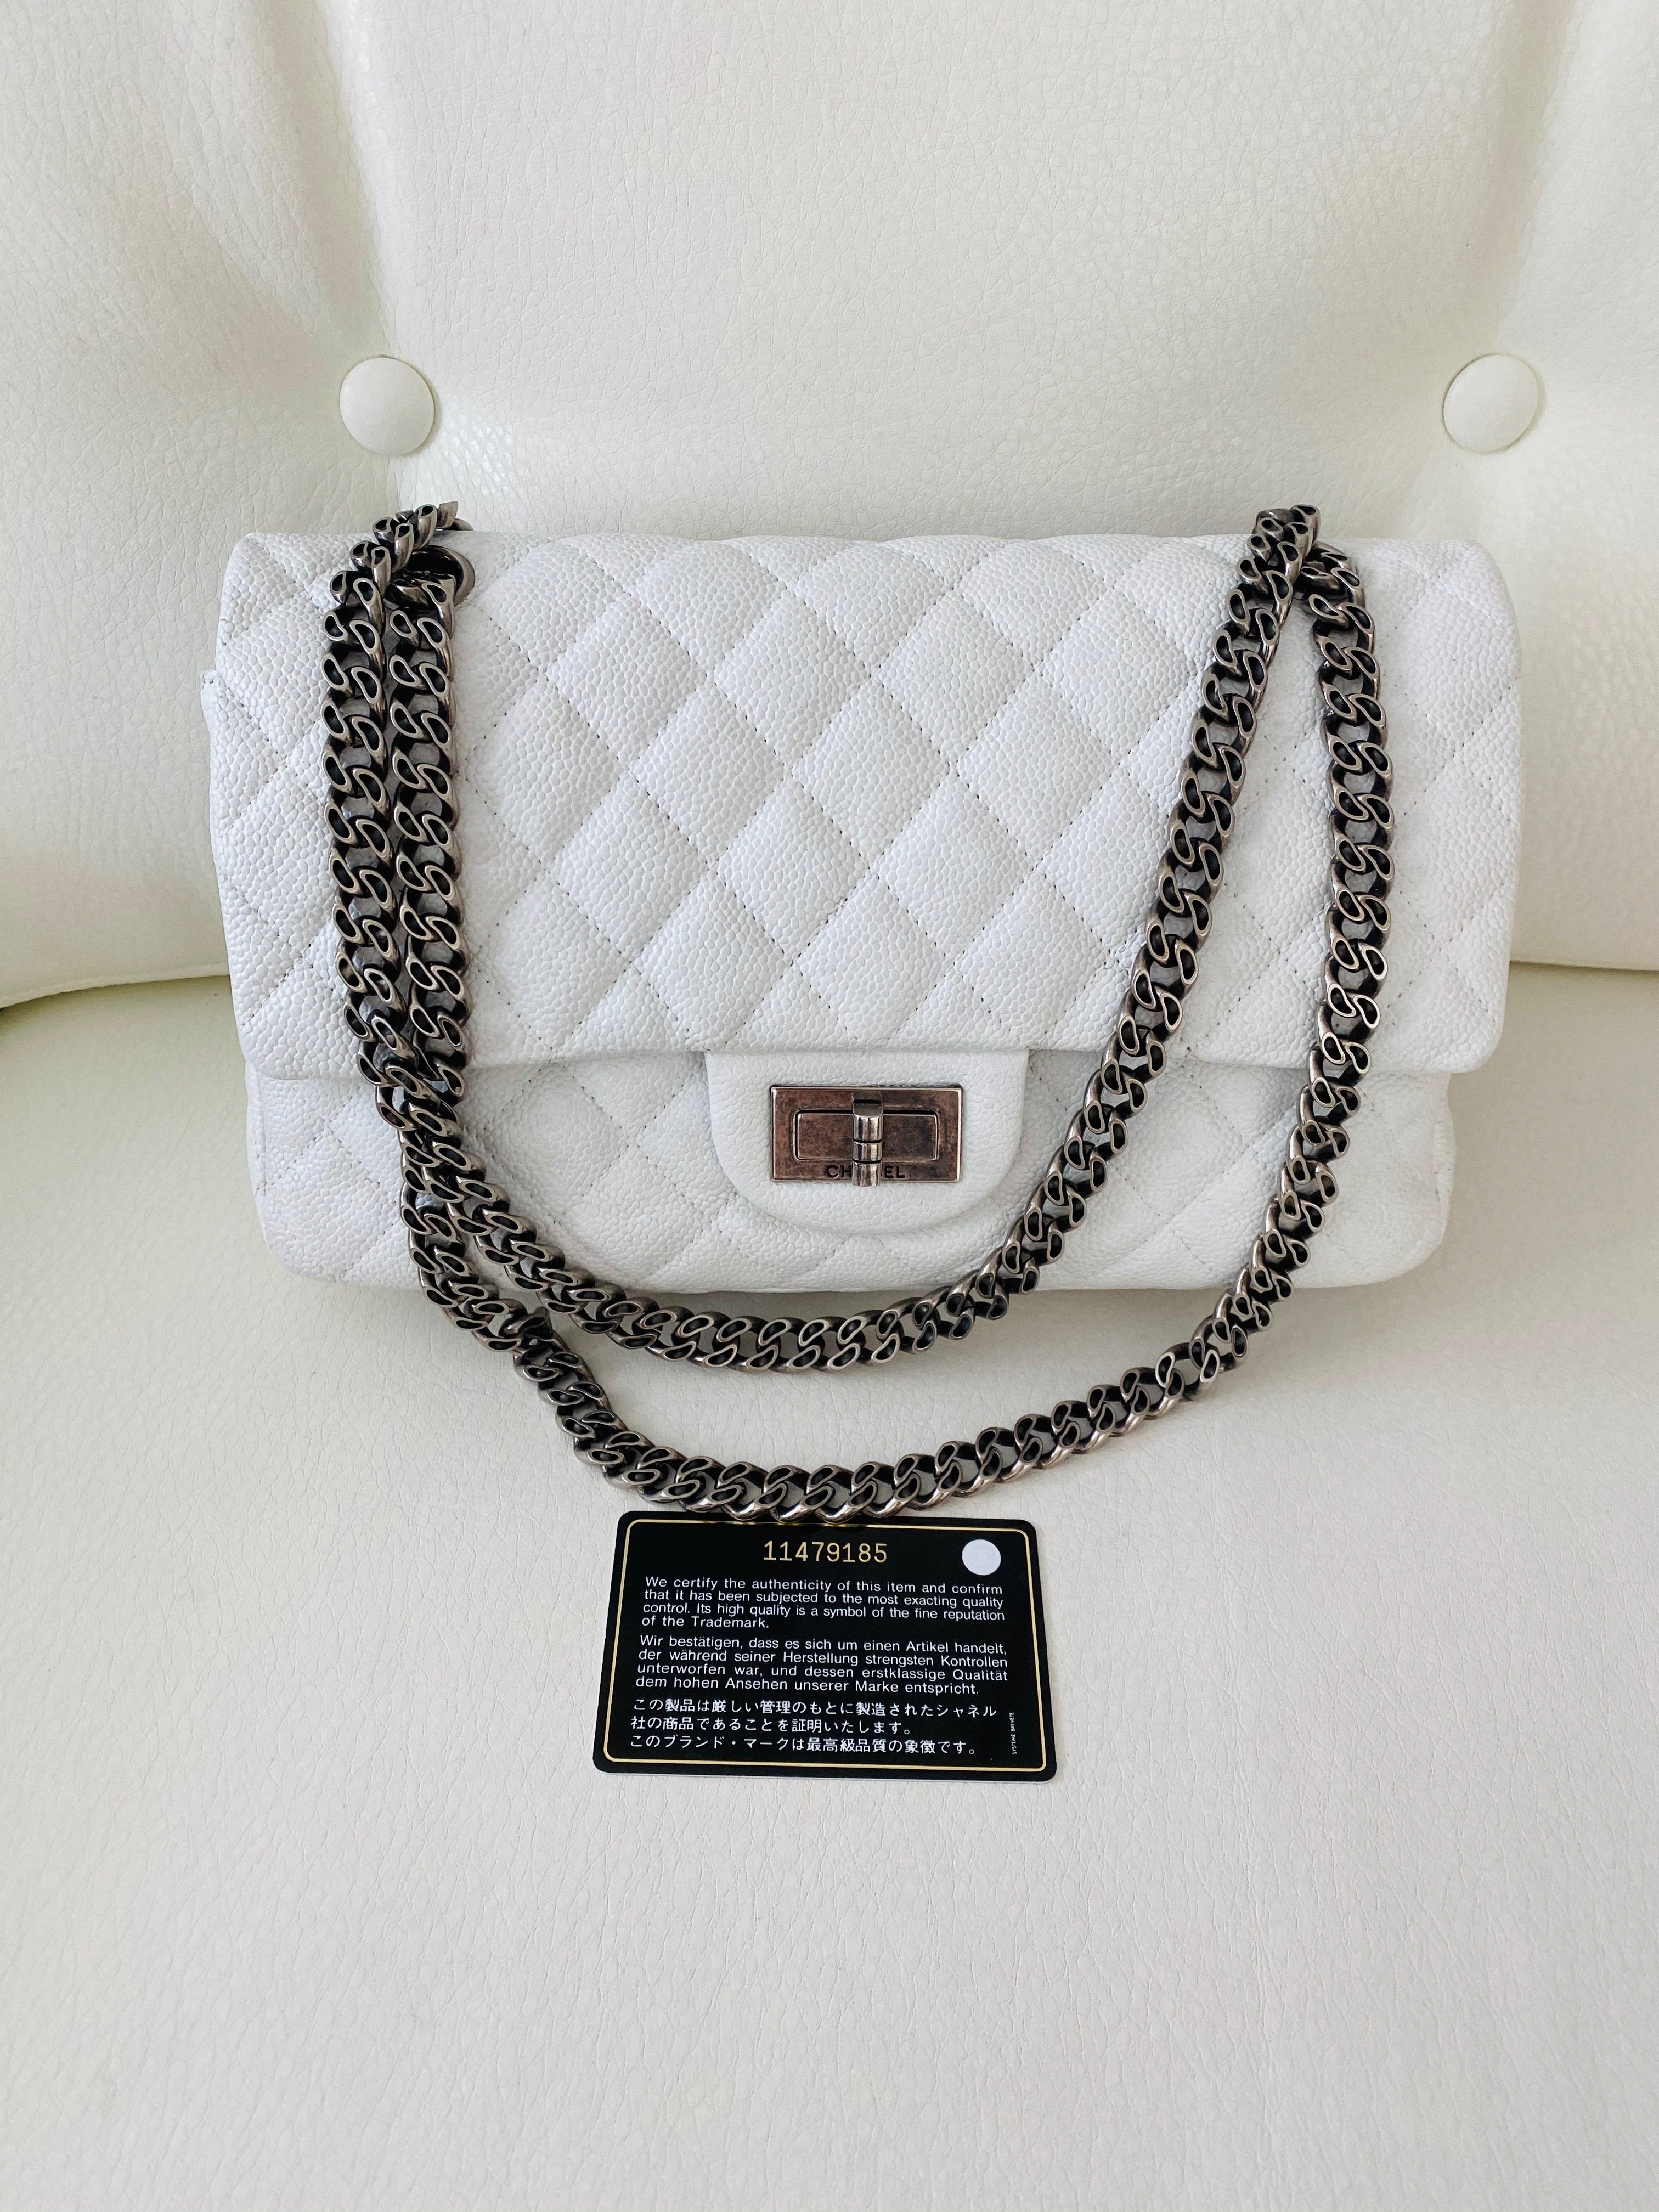 Chanel reissue 225 – Beccas Bags